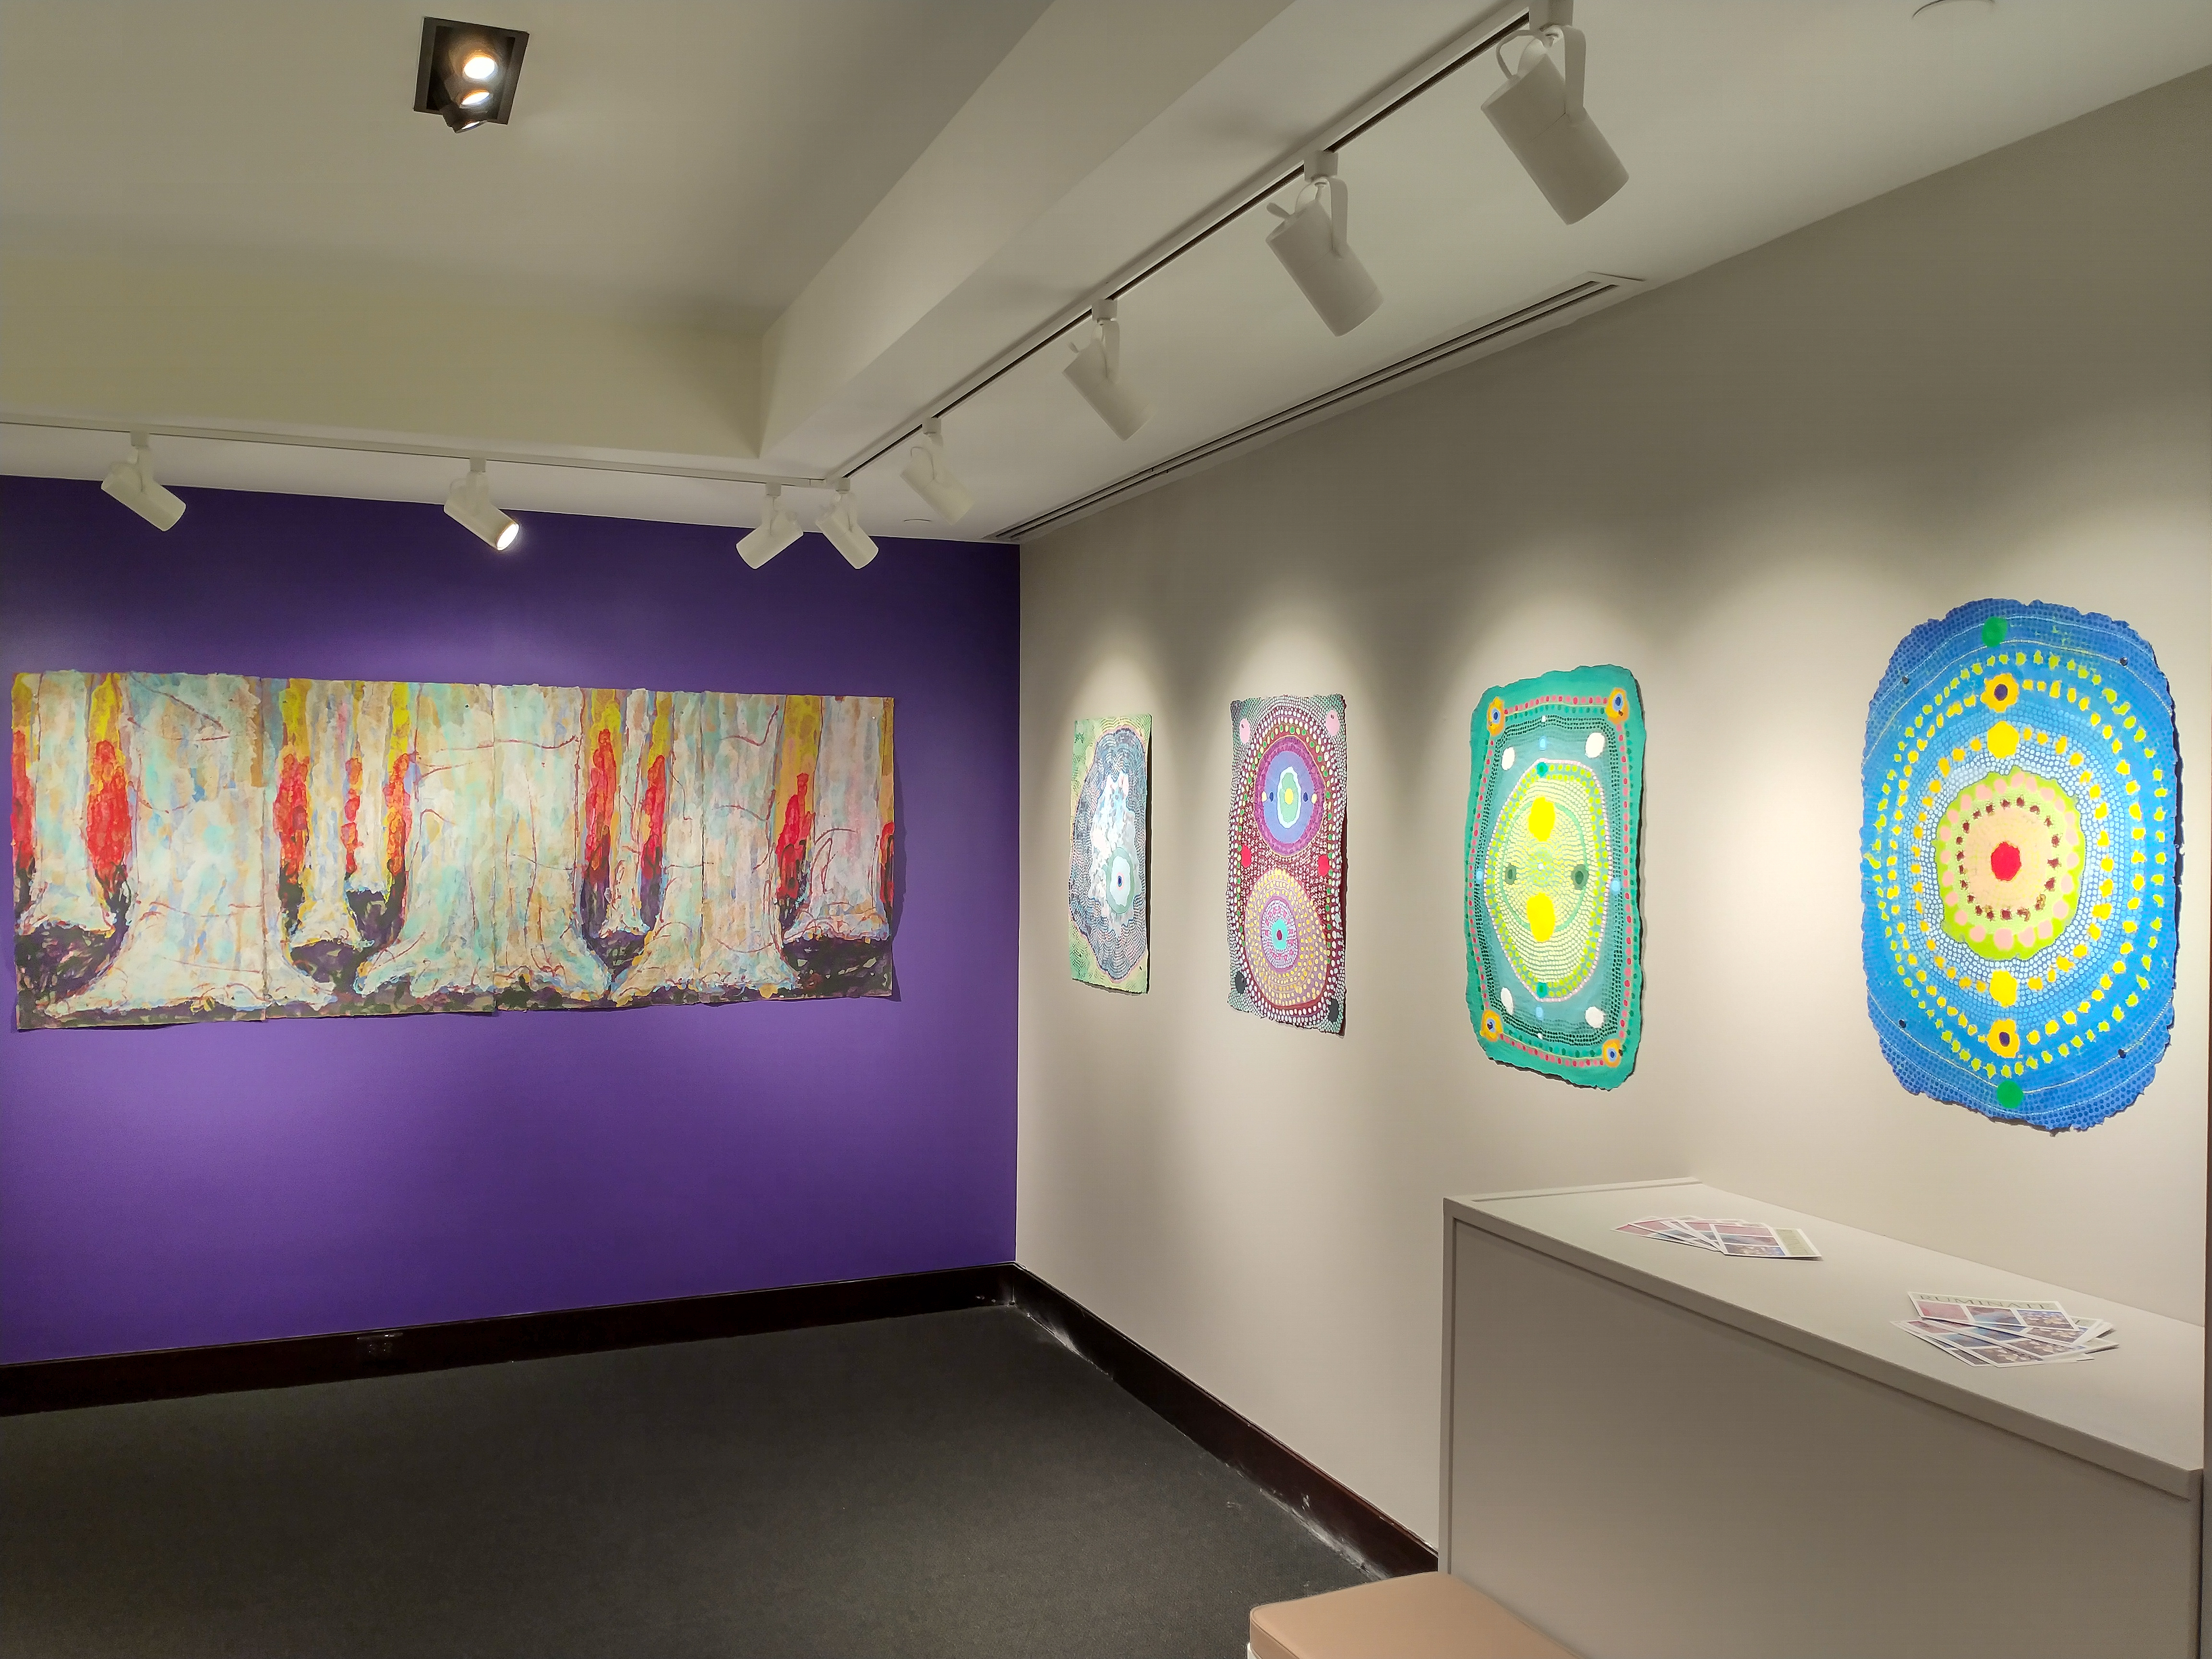 View of the east wall of the small gallery. All the pieces on this wall are created by Chad Hayward. From right to left, the order in which you would encounter the pieces upon entering the gallery: Gateway is a primarily blue piece with concentric circles radiating from a red dot at the center of the page. The concentric circles are created by a line of smaller circles. Papillon is a rectangular green piece with two yellow dots stacked one above the other at the center of the piece and two dark green dots arranged horizontally. These two sets of dots organized in cardinal directions sits atop a field of small white and yellow dots arranged radially in concentric circles. A rectangle of red dots runs along the outer edge of the piece. Element 115 is another series of radial dots on a rectangular sheet the colors lean more towards purple, yellow and white. The final piece, titled Rock Salt features the repetitive dot pattern like the other pieces but is shaped more organically. This piece features a blue form on top of a green background with the entire thing being coated in a light layer of white fibers.  